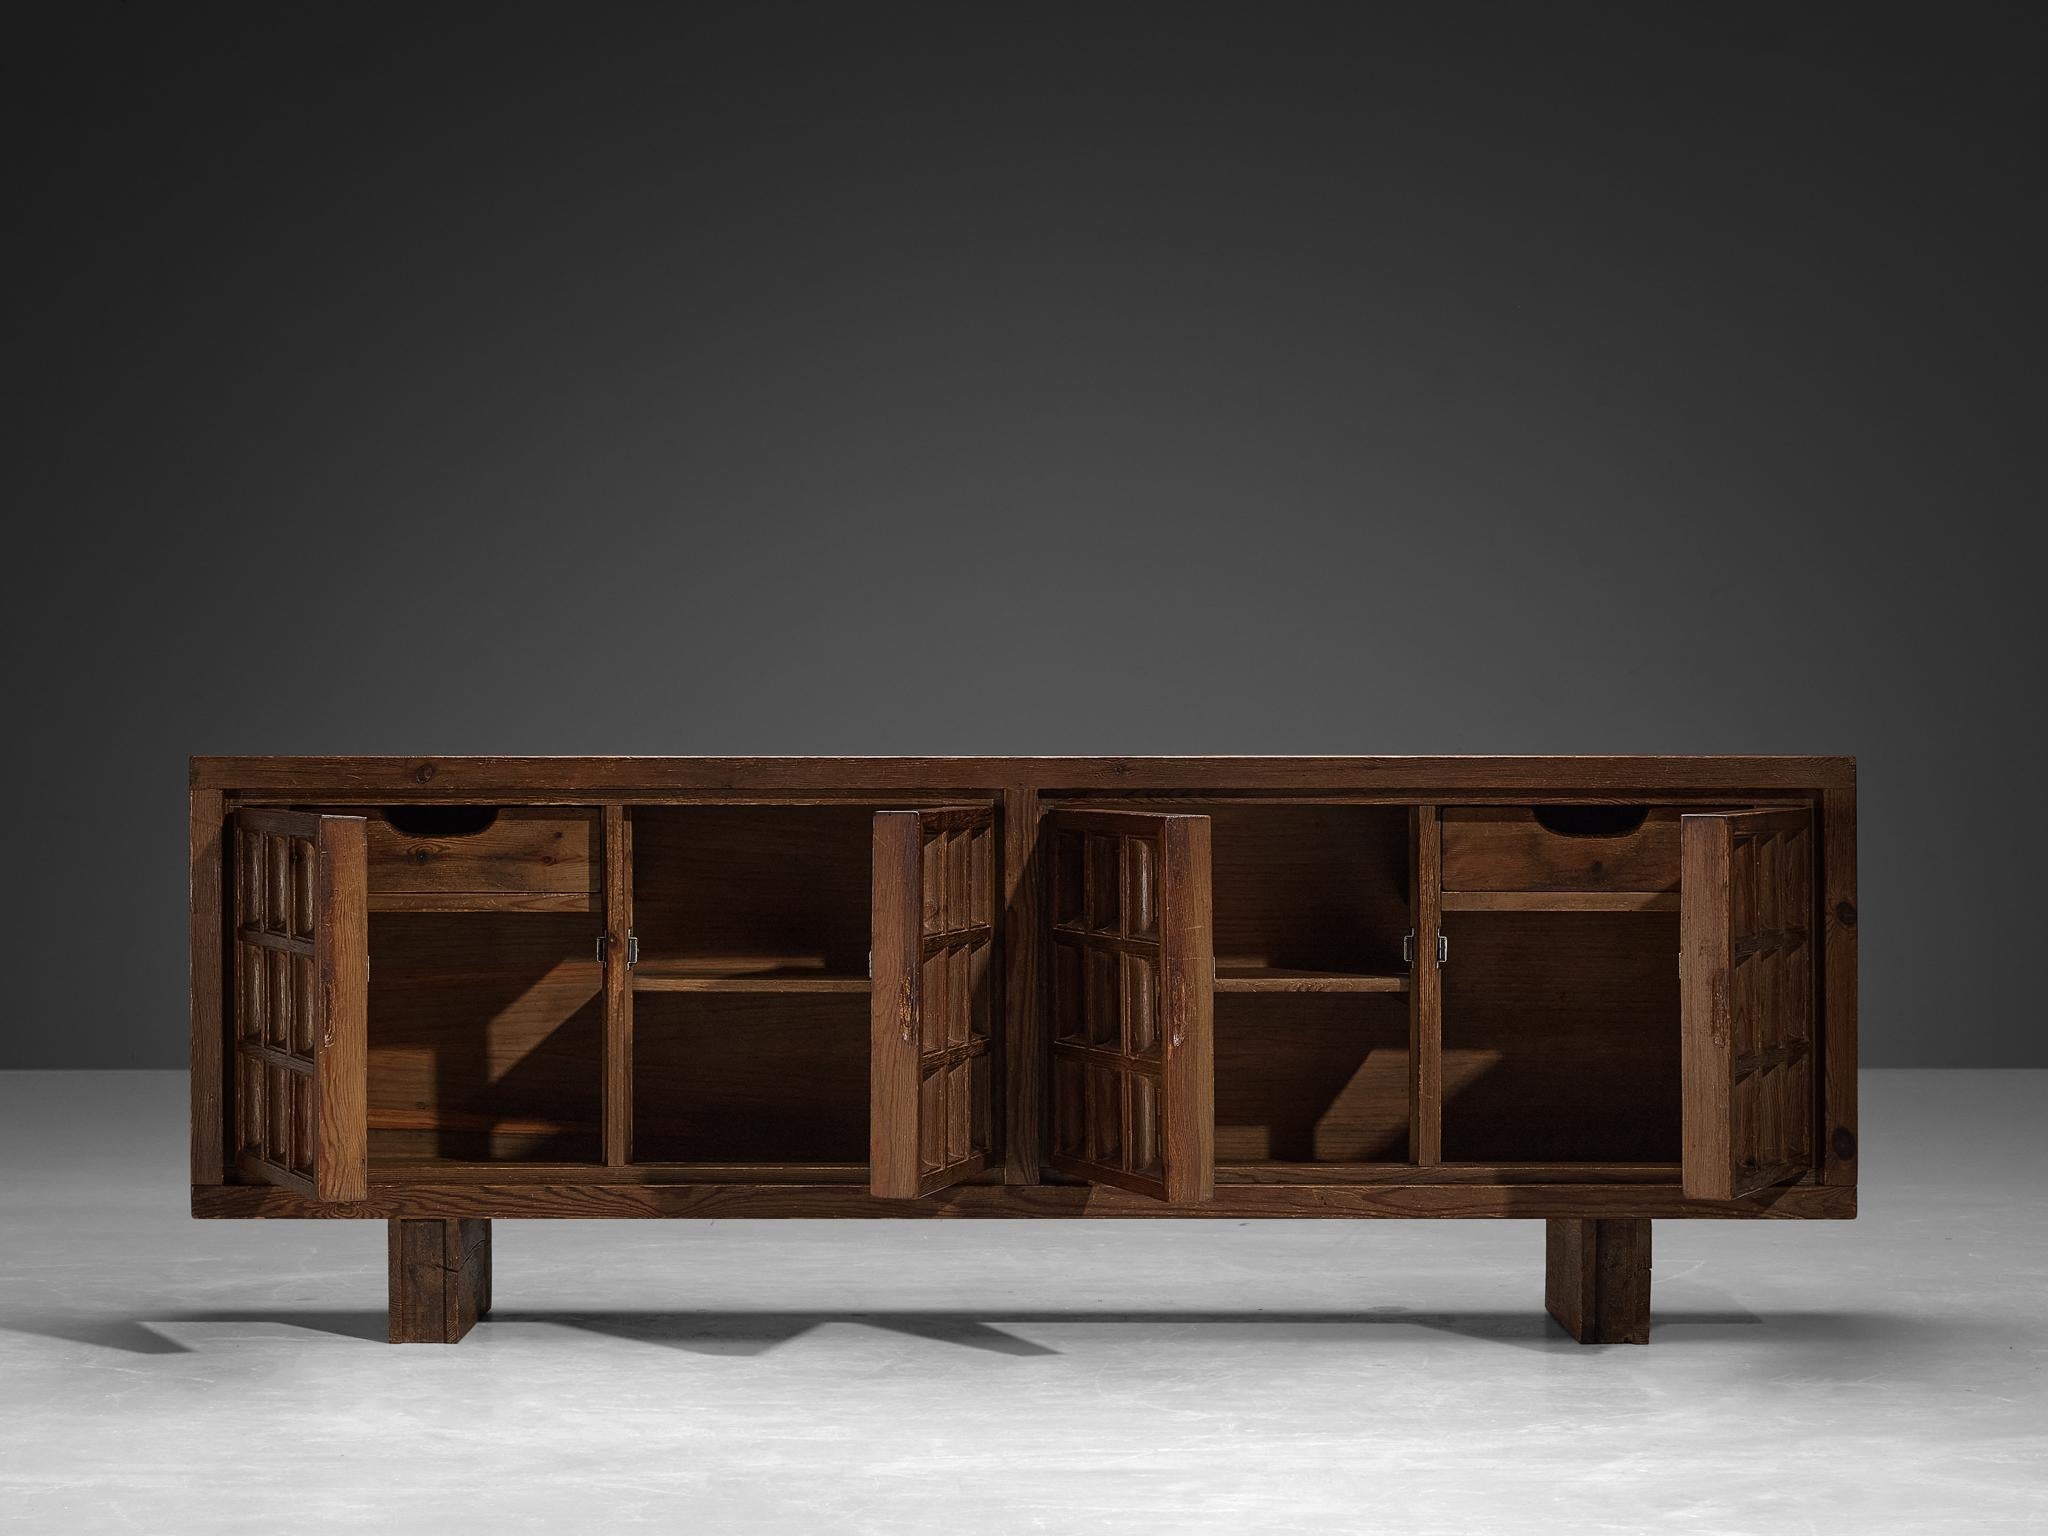 Biosca Spanish Sideboard in Stained Pine